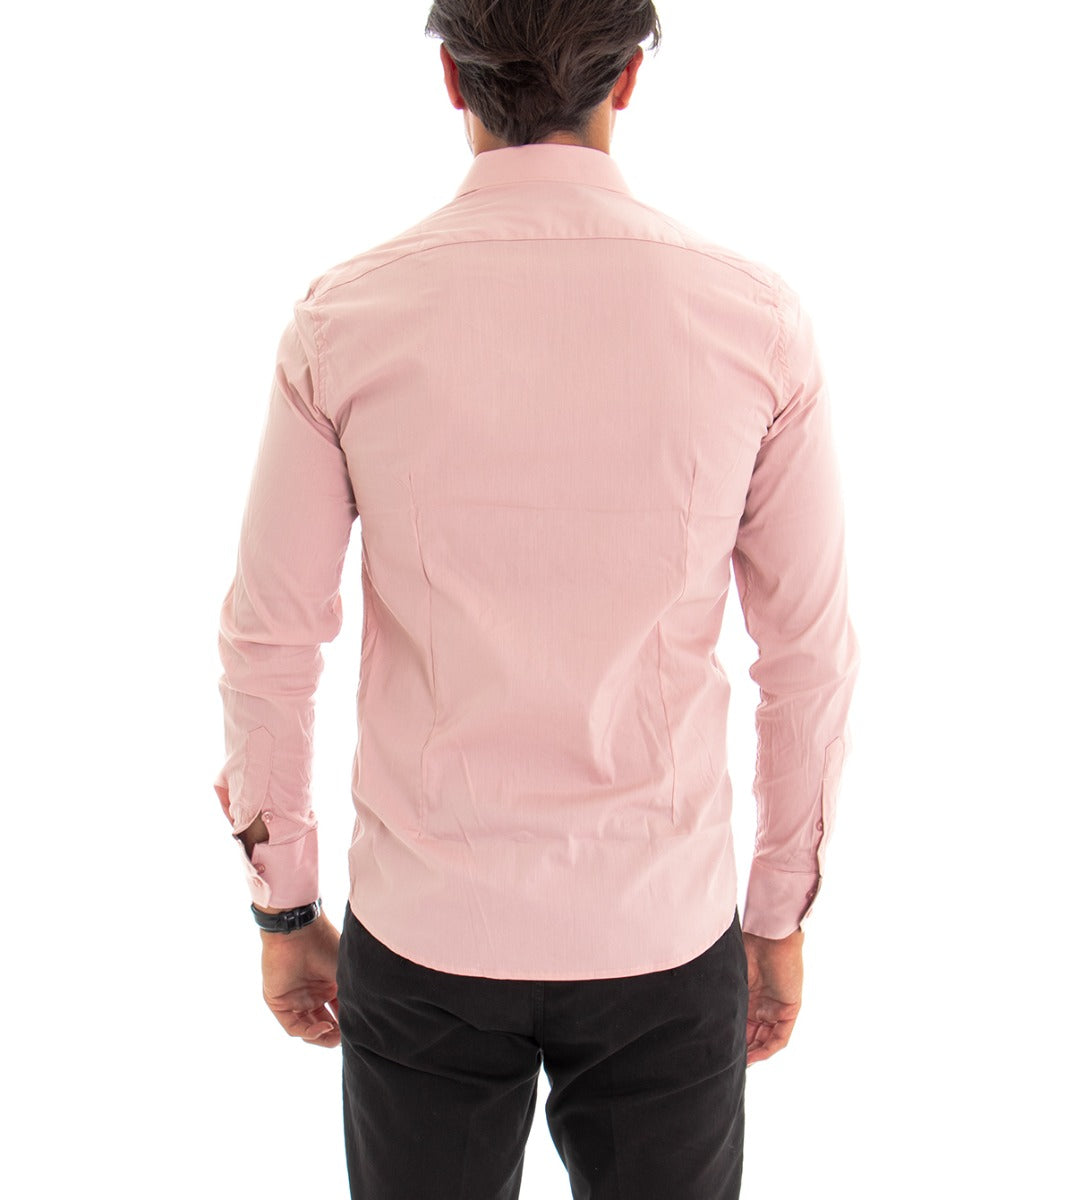 Men's Shirt With Collar Long Sleeve Slim Fit Basic Casual Cotton Pink GIOSAL-C1805A